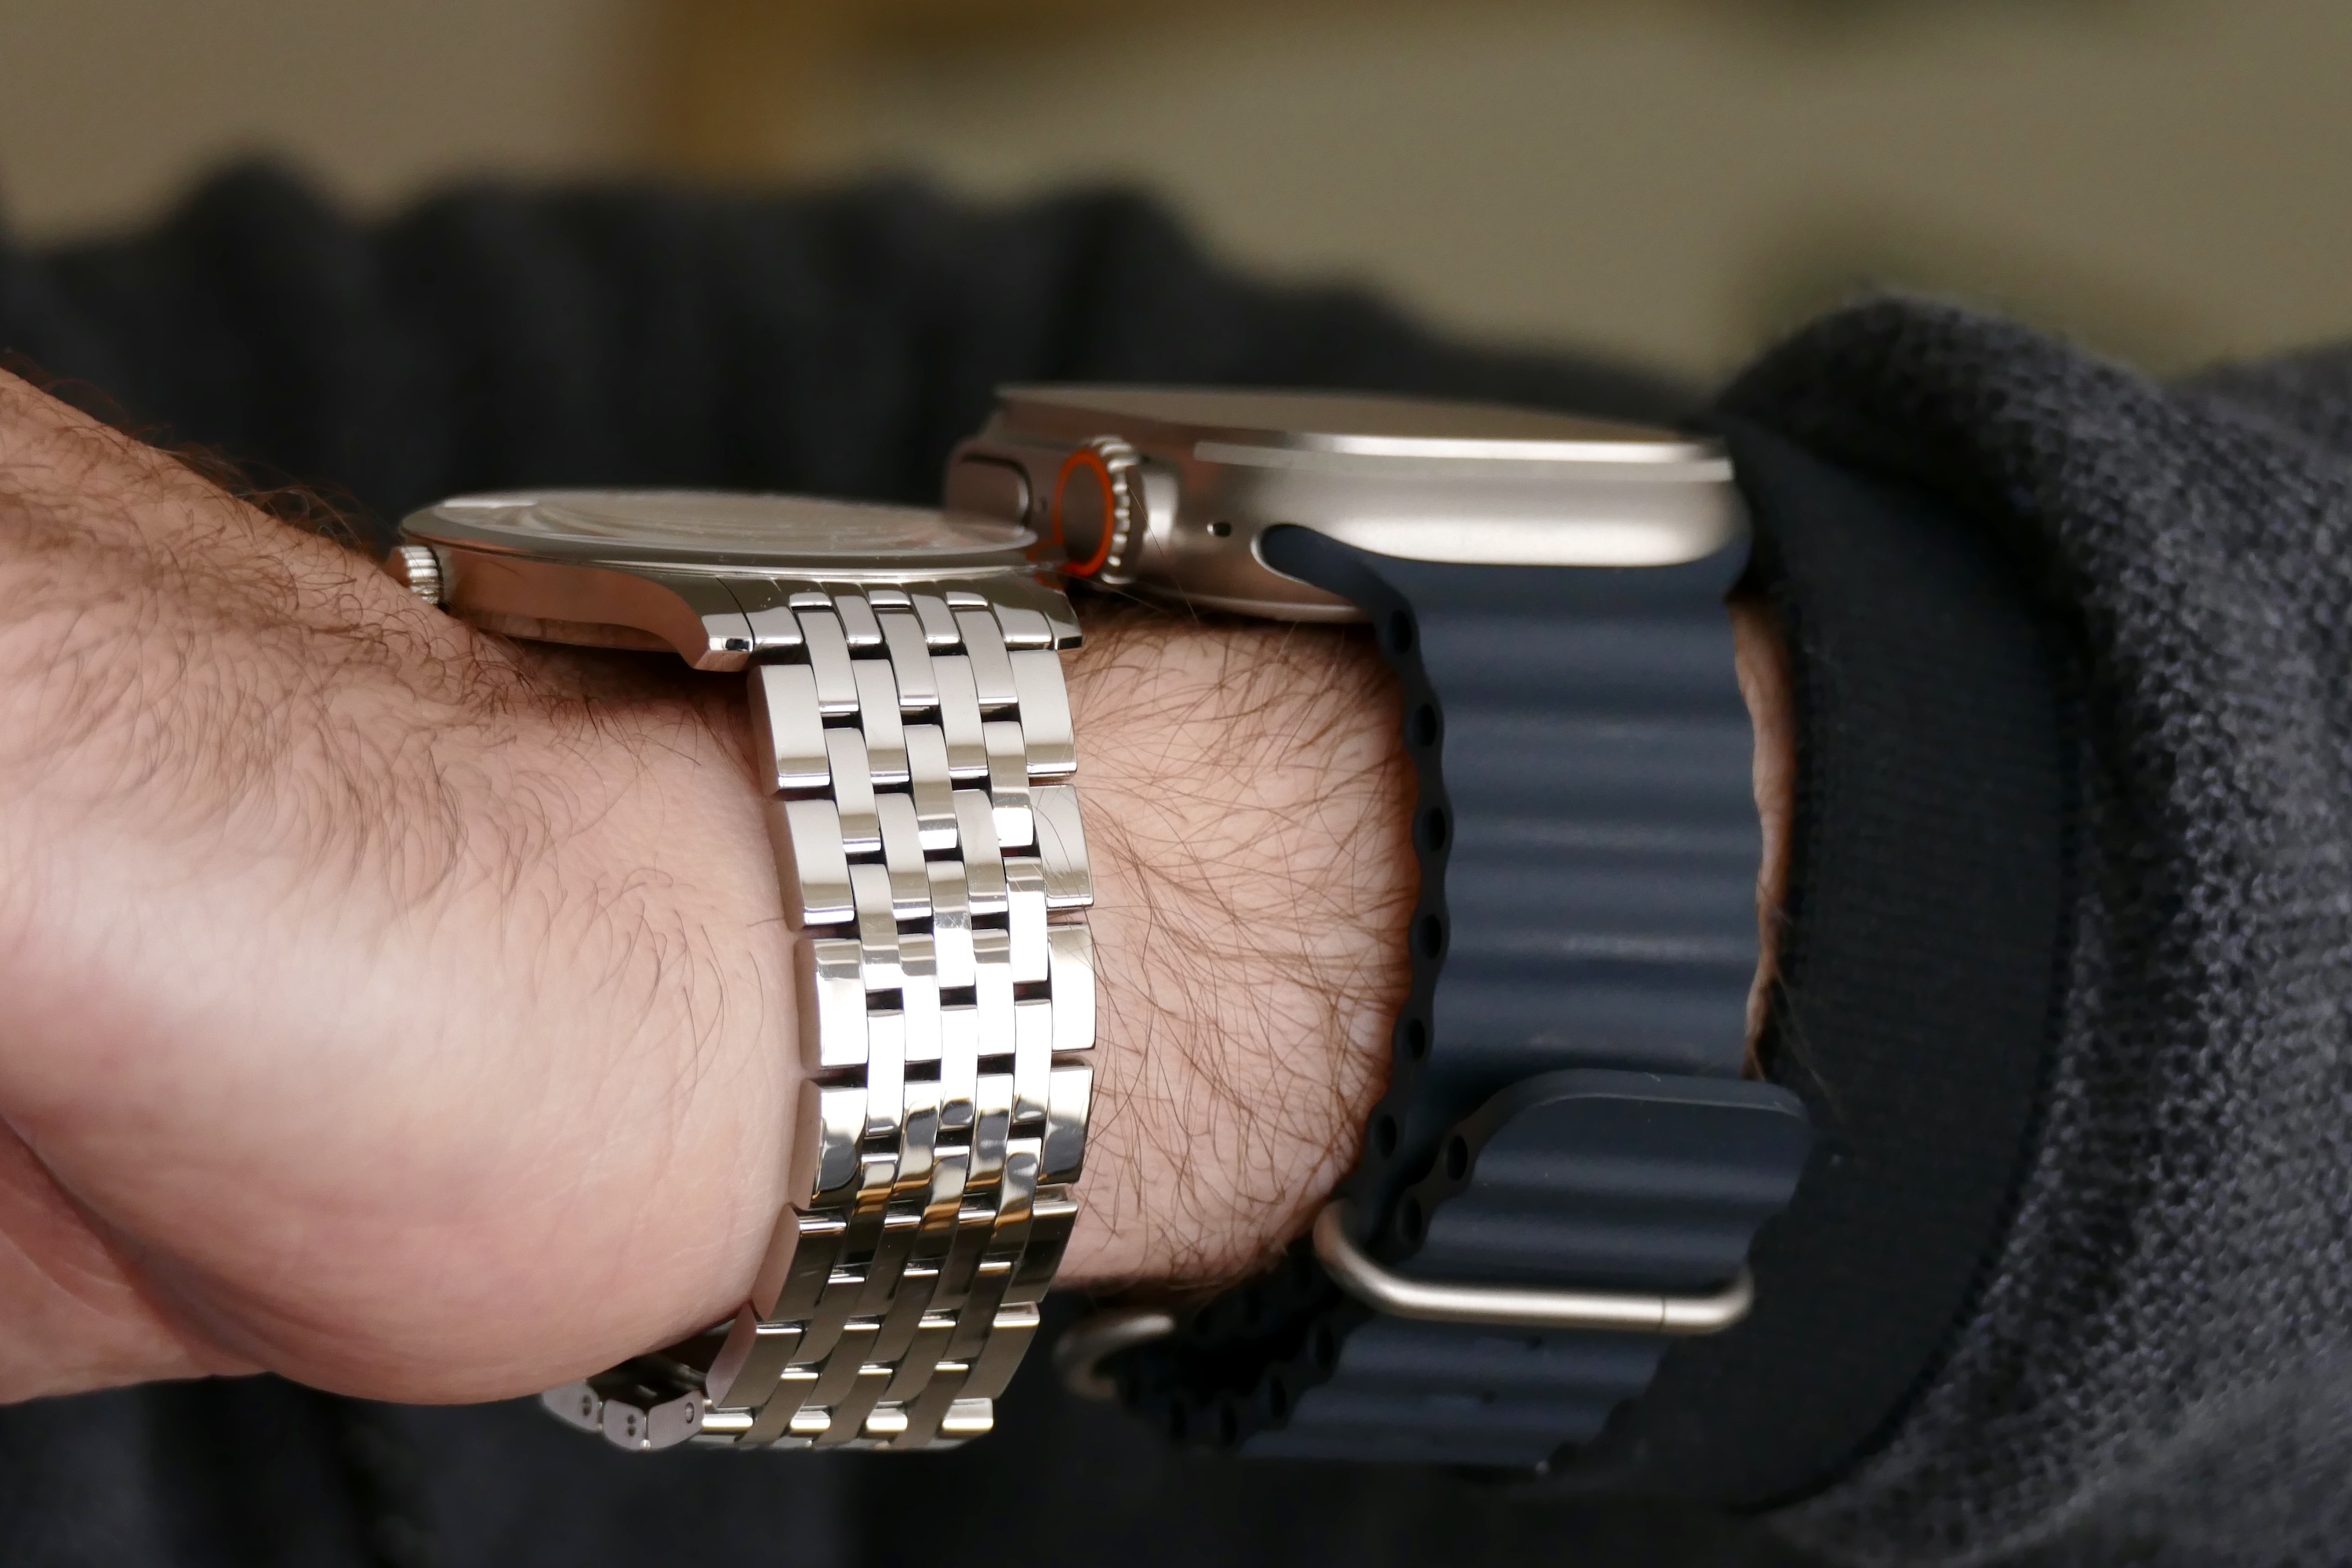 The Apple Watch Ultra with the Tissot Tradition seen from the side on a wrist.